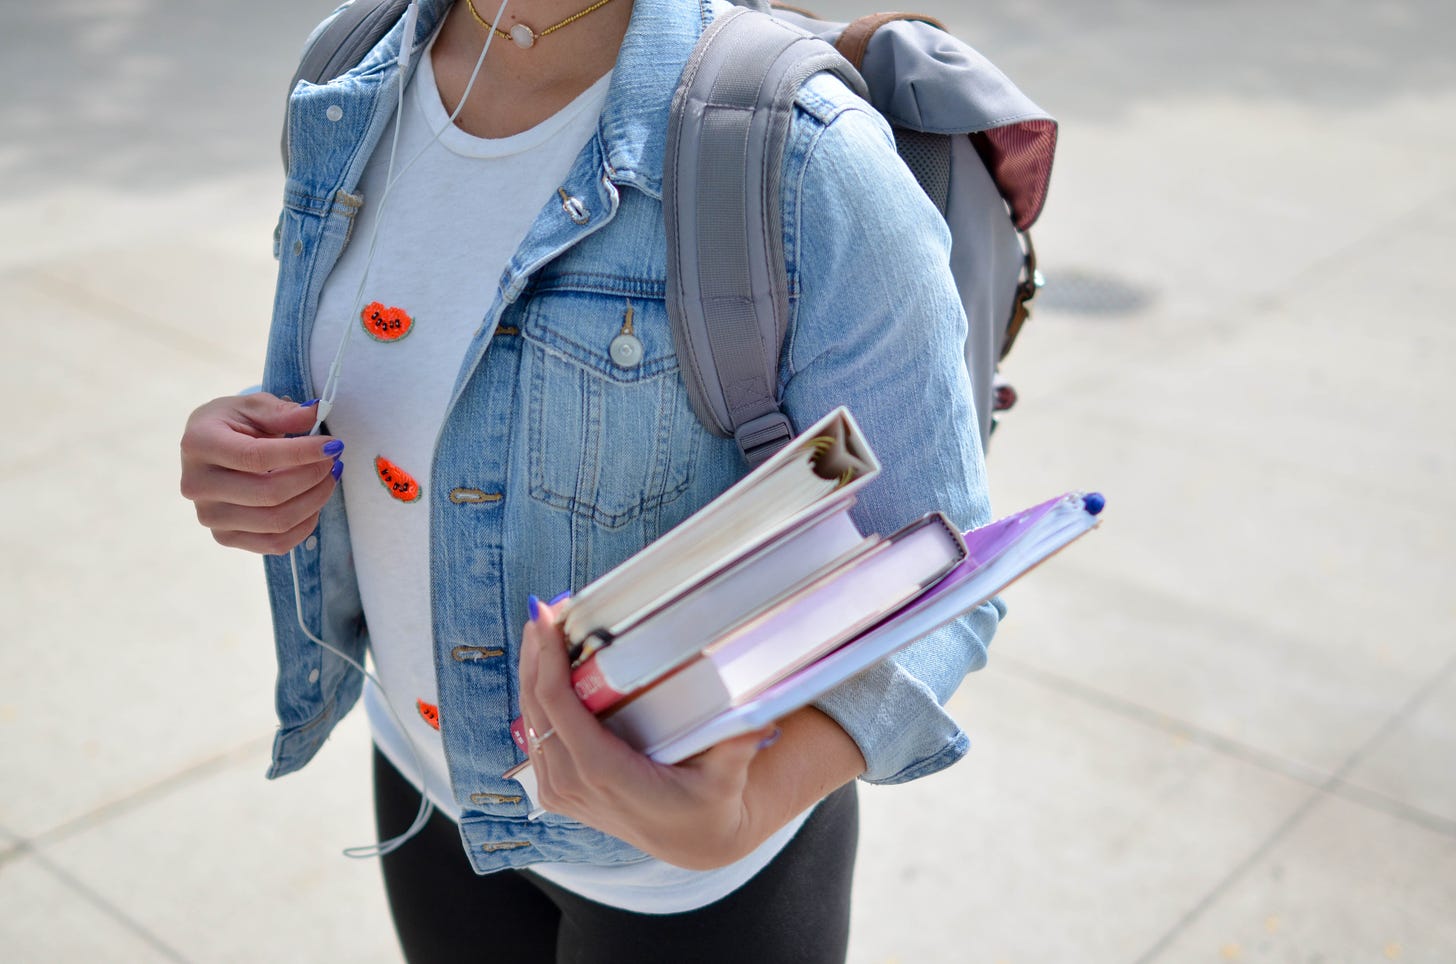 photo of the torso of a student wearing a jean jacket holding a stack of books